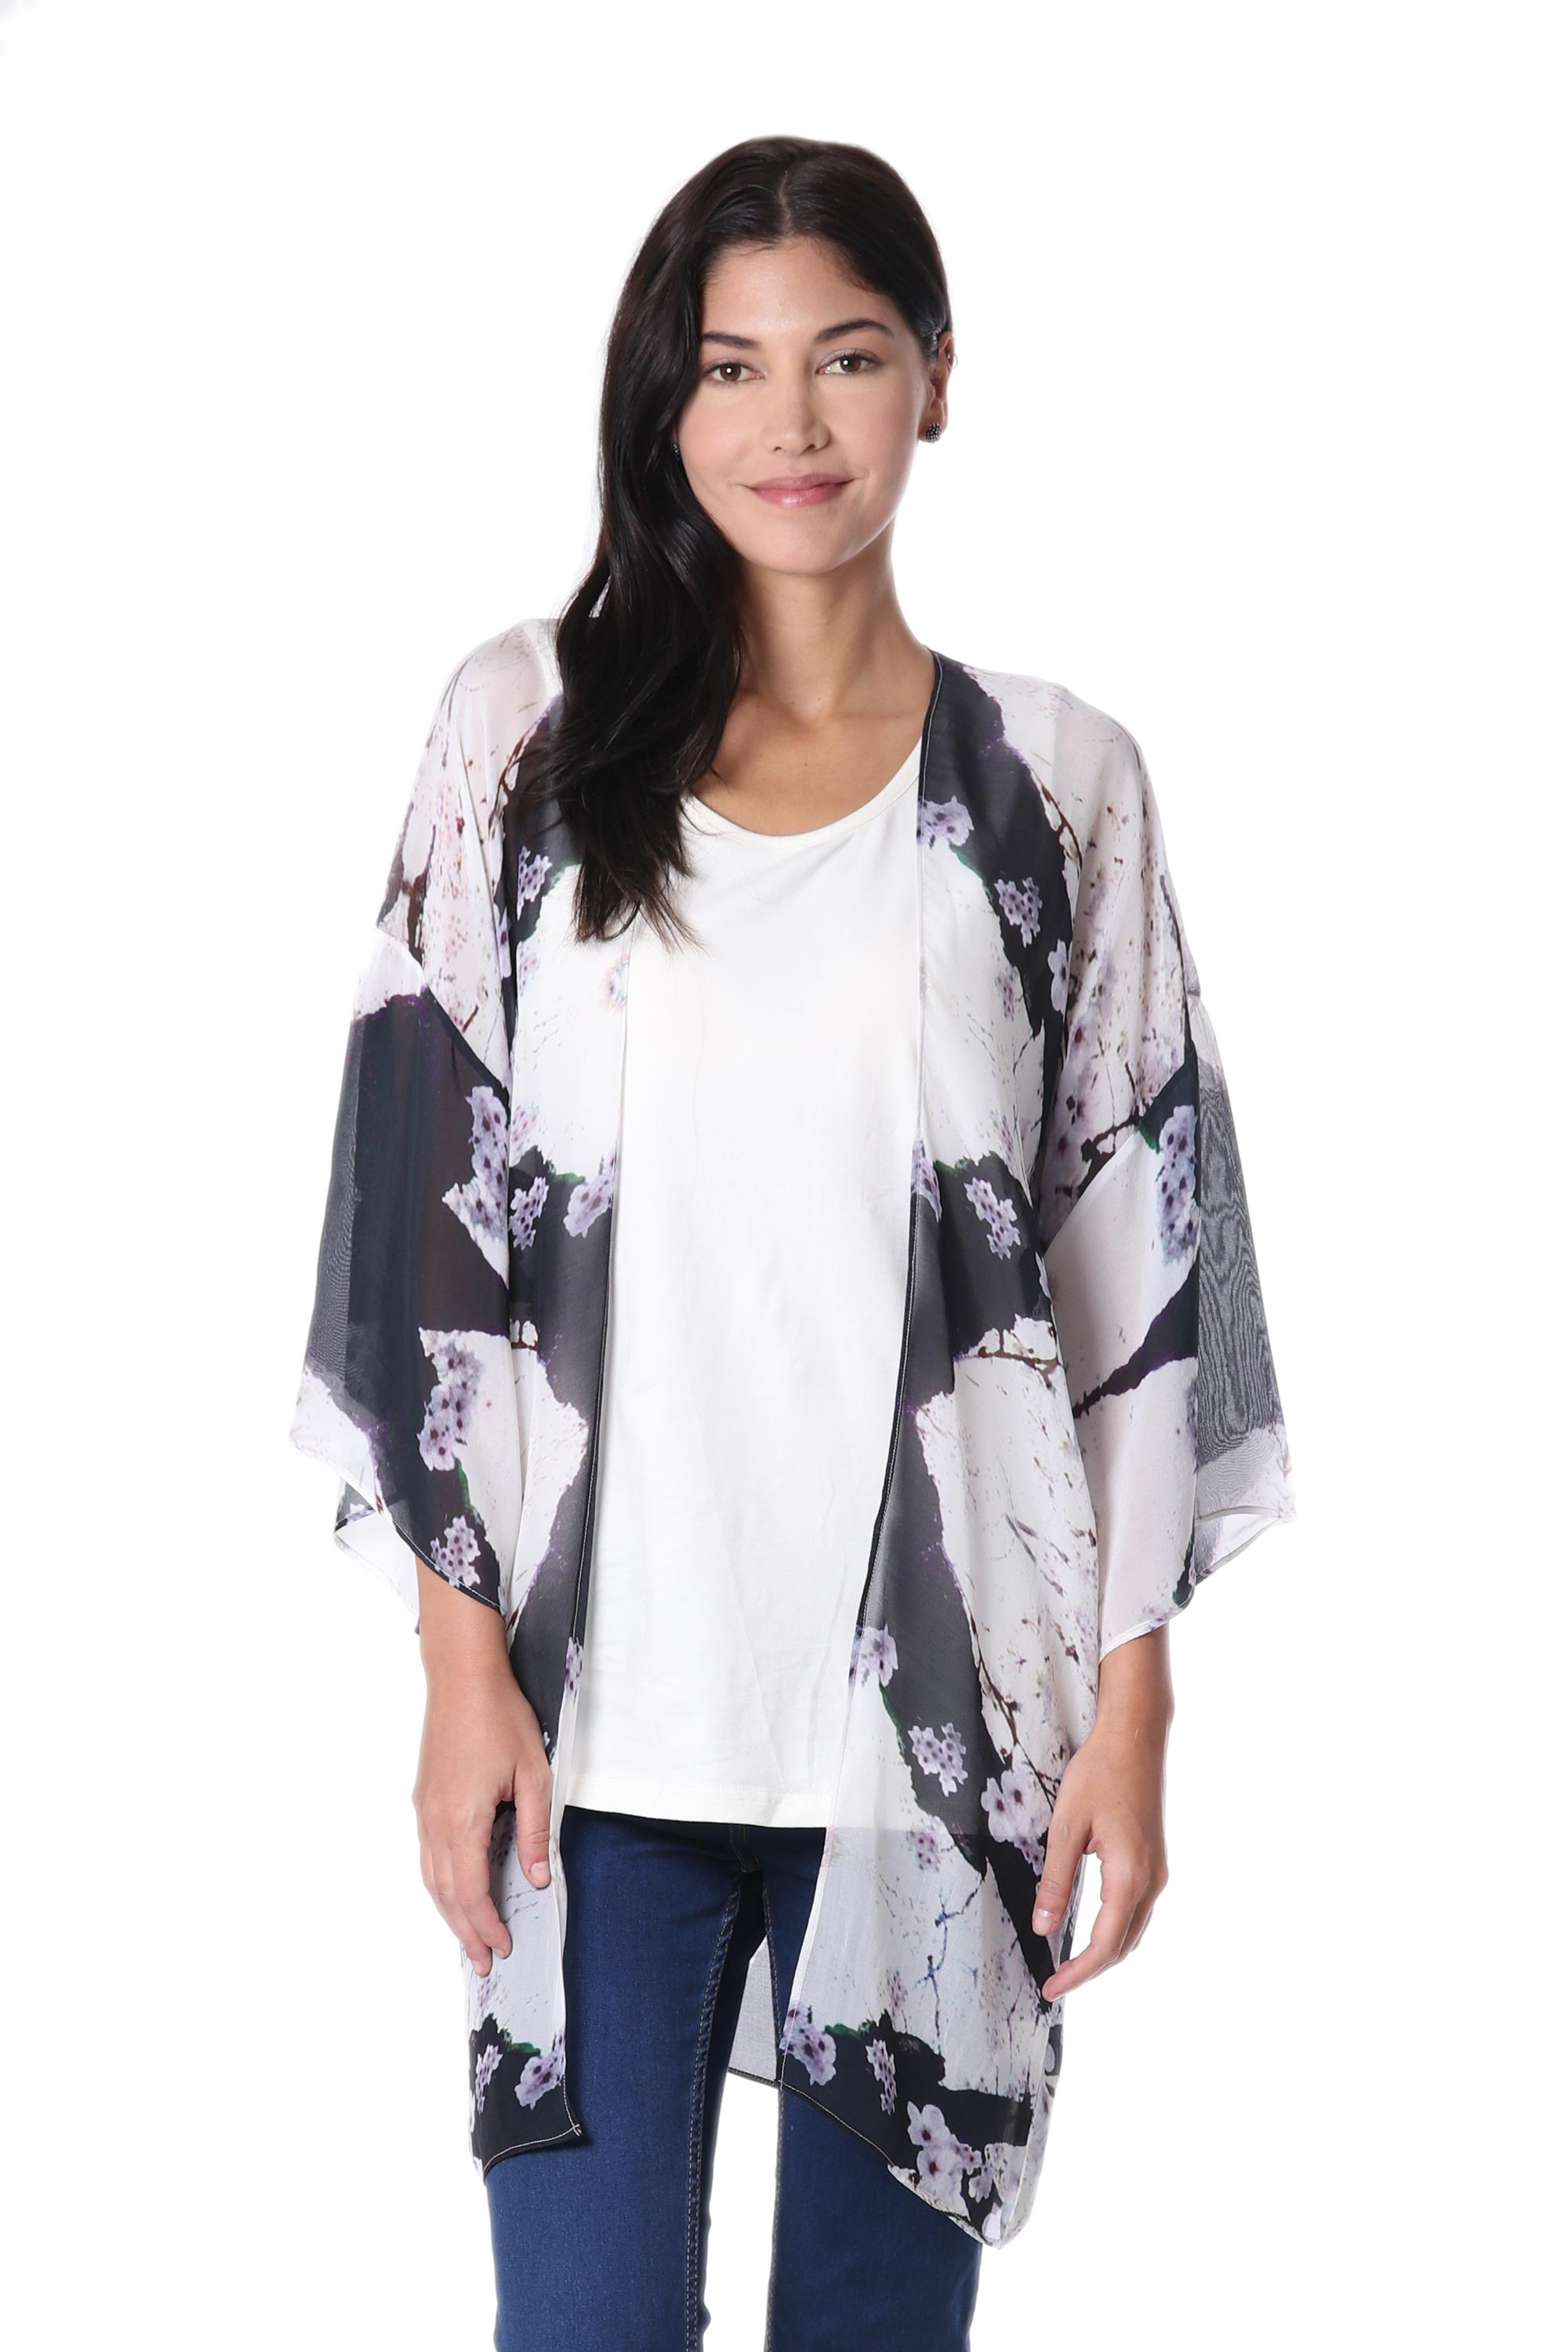 UNICEF Market | Black and White Open Front Floral Kimono Jacket from ...